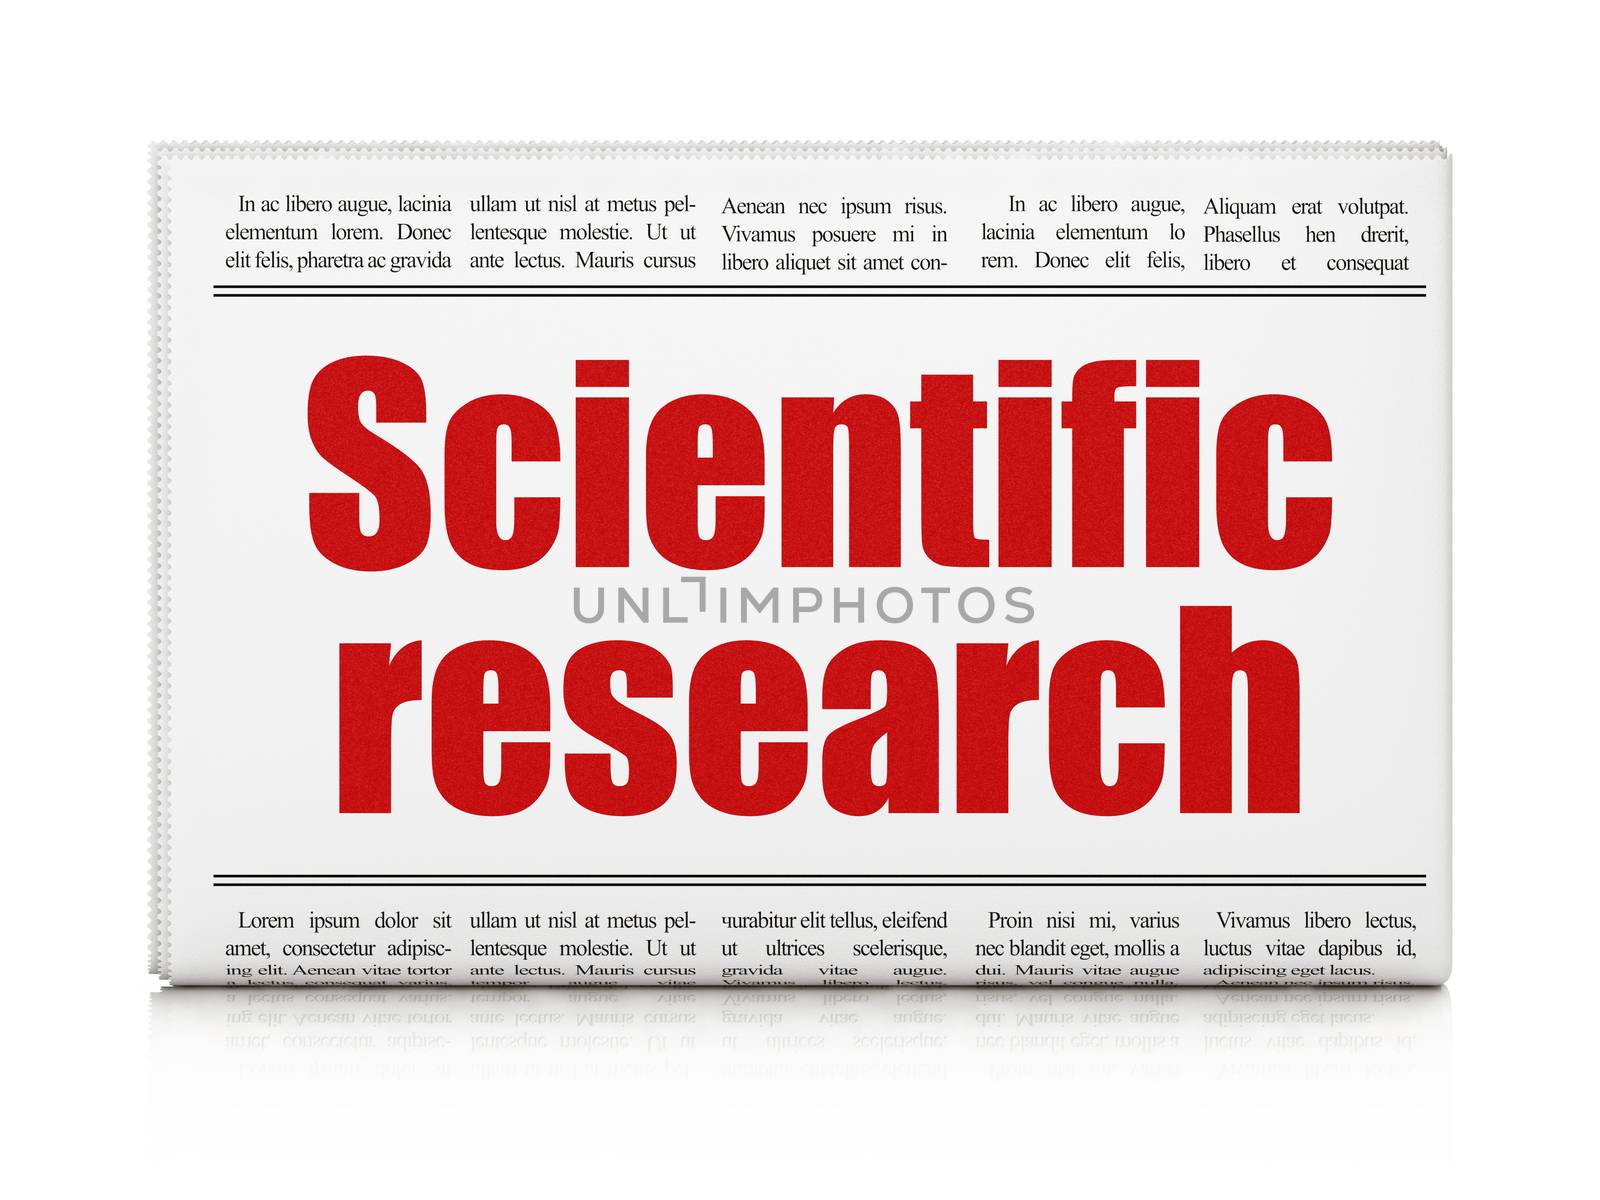 Science concept: newspaper headline Scientific Research on White background, 3d render